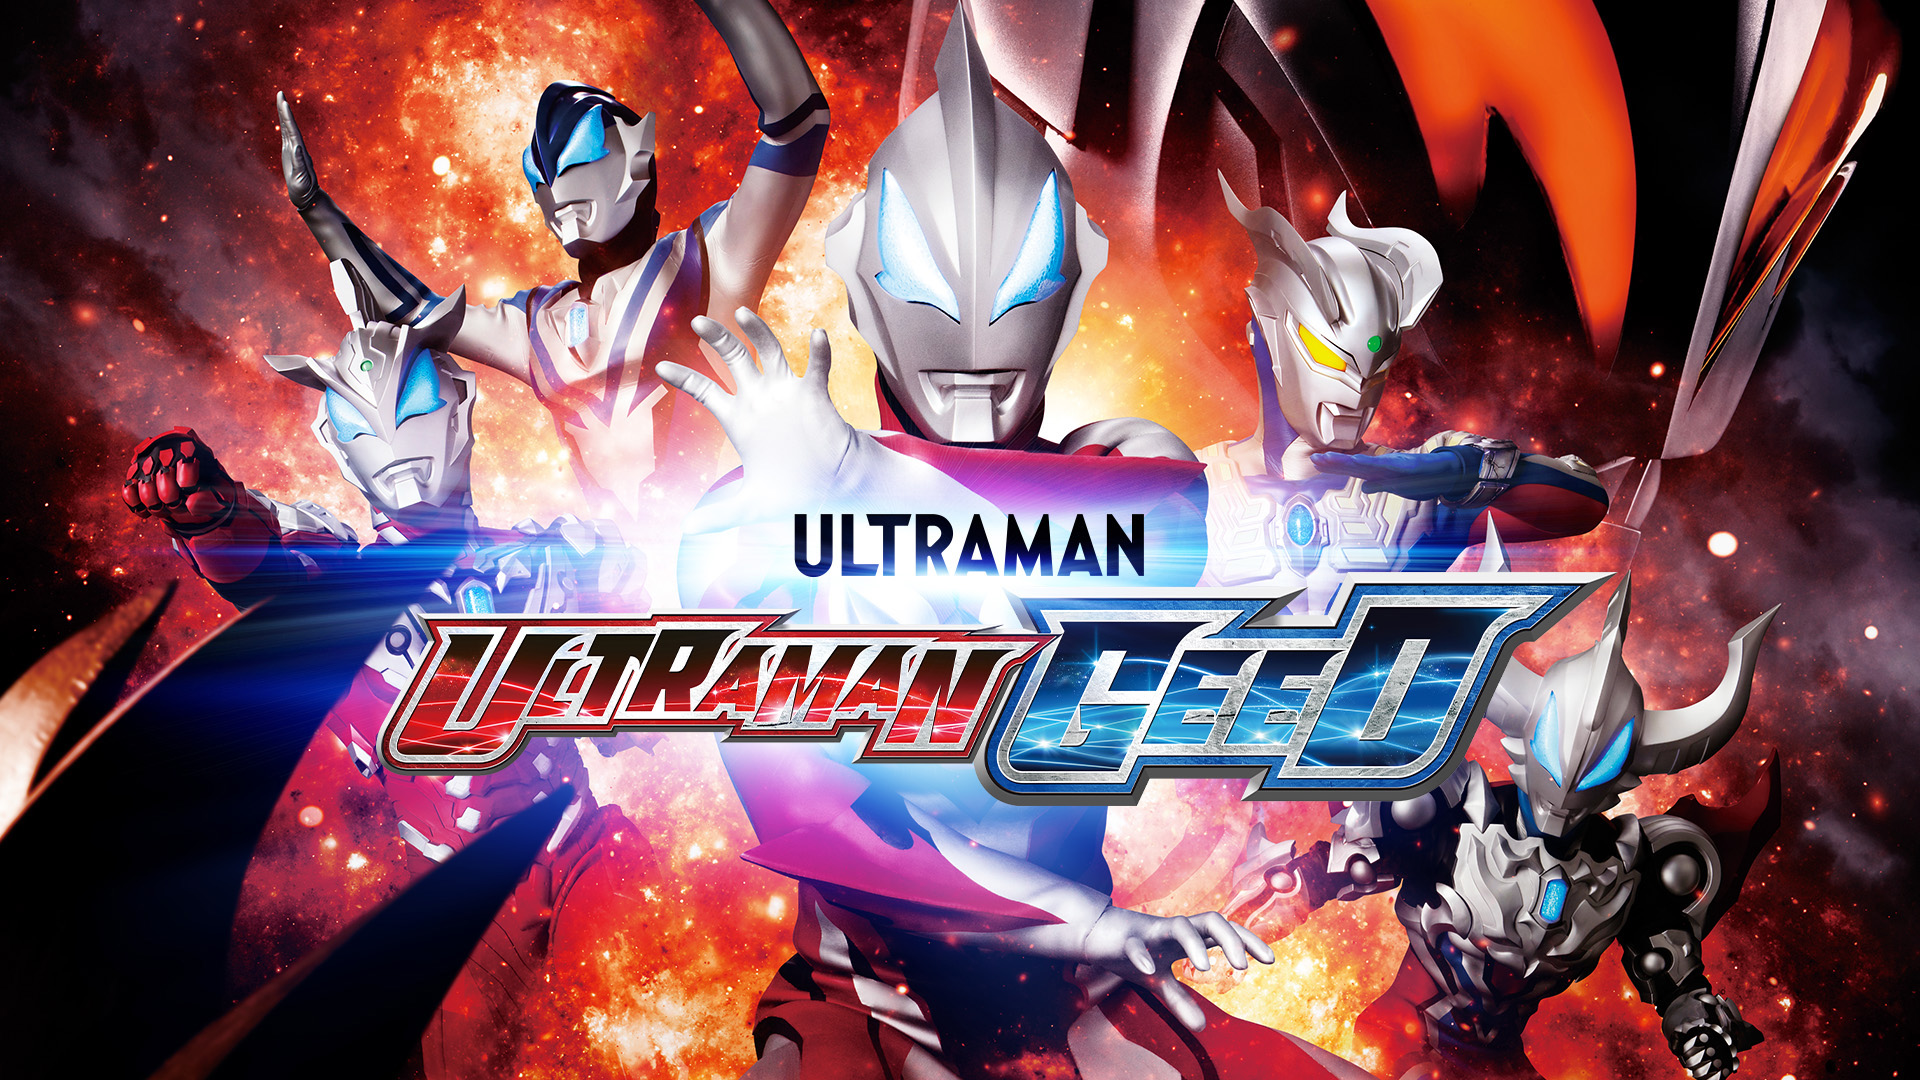 Ultraman Orb And Ultraman Geed Now Available To Purchase And Stream On Moviespree Ultra Q And Ultraman Available To Stream On Amazon Scifi Japan